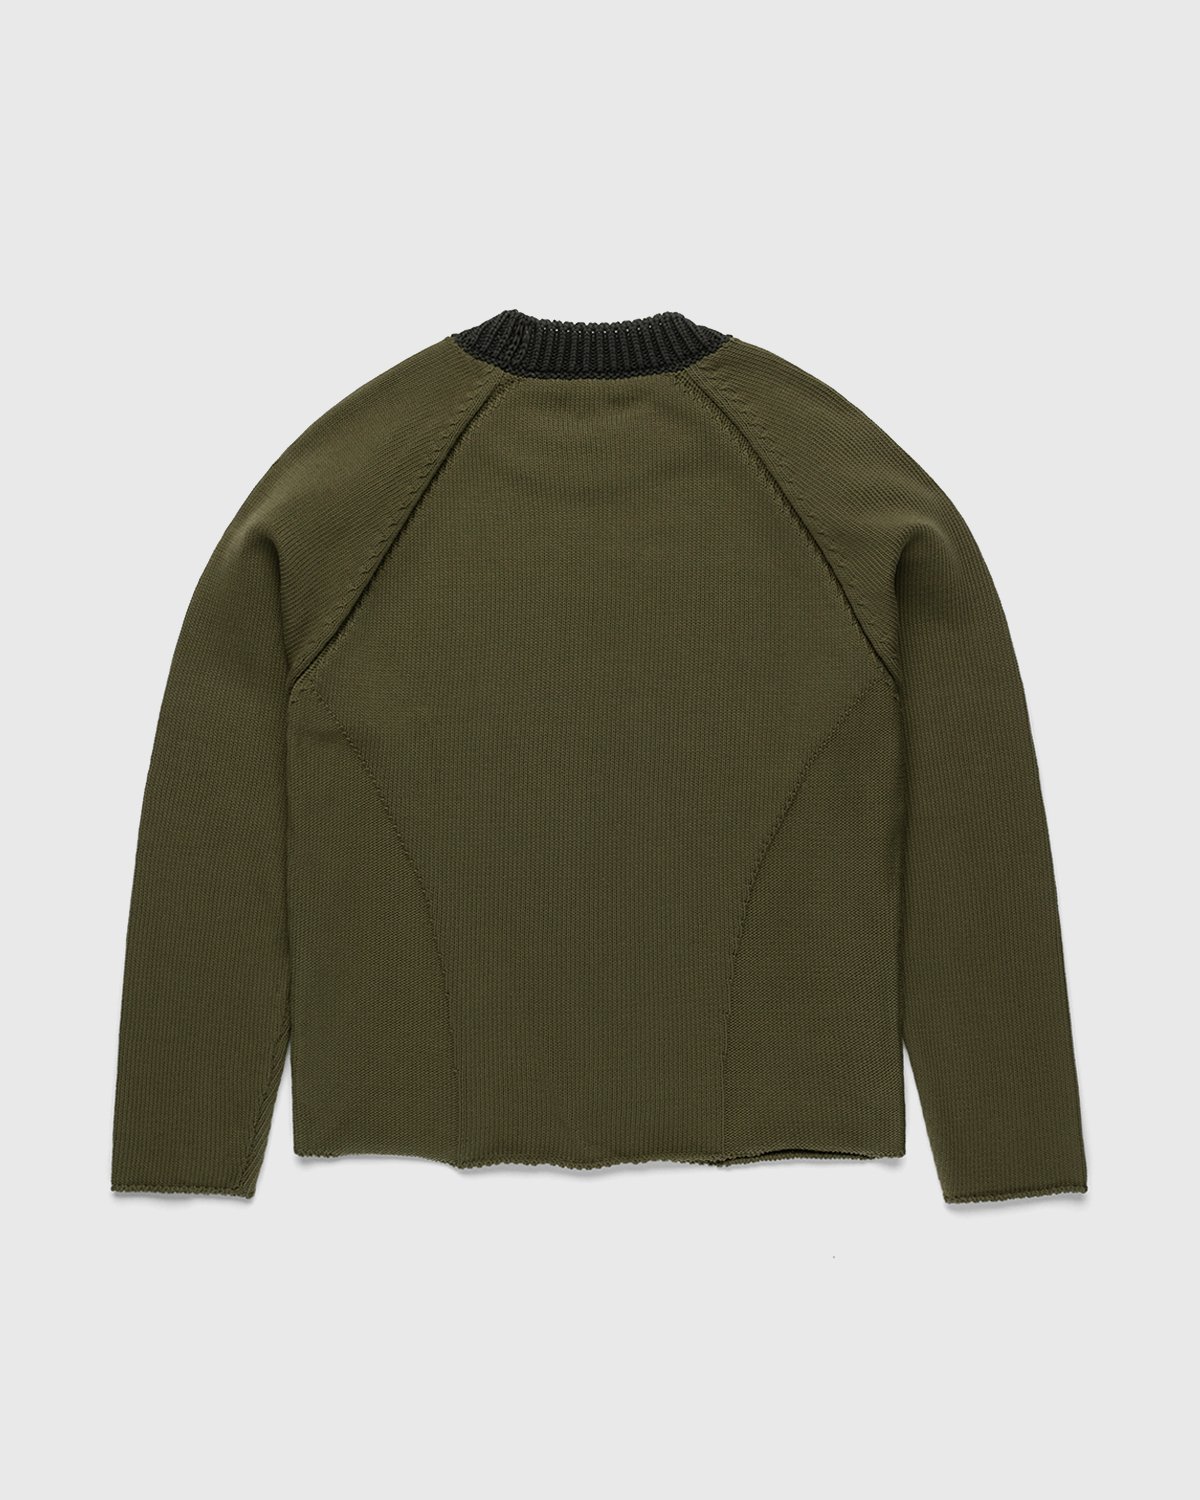 Phipps - Armor Knit Green - Clothing - Green - Image 2